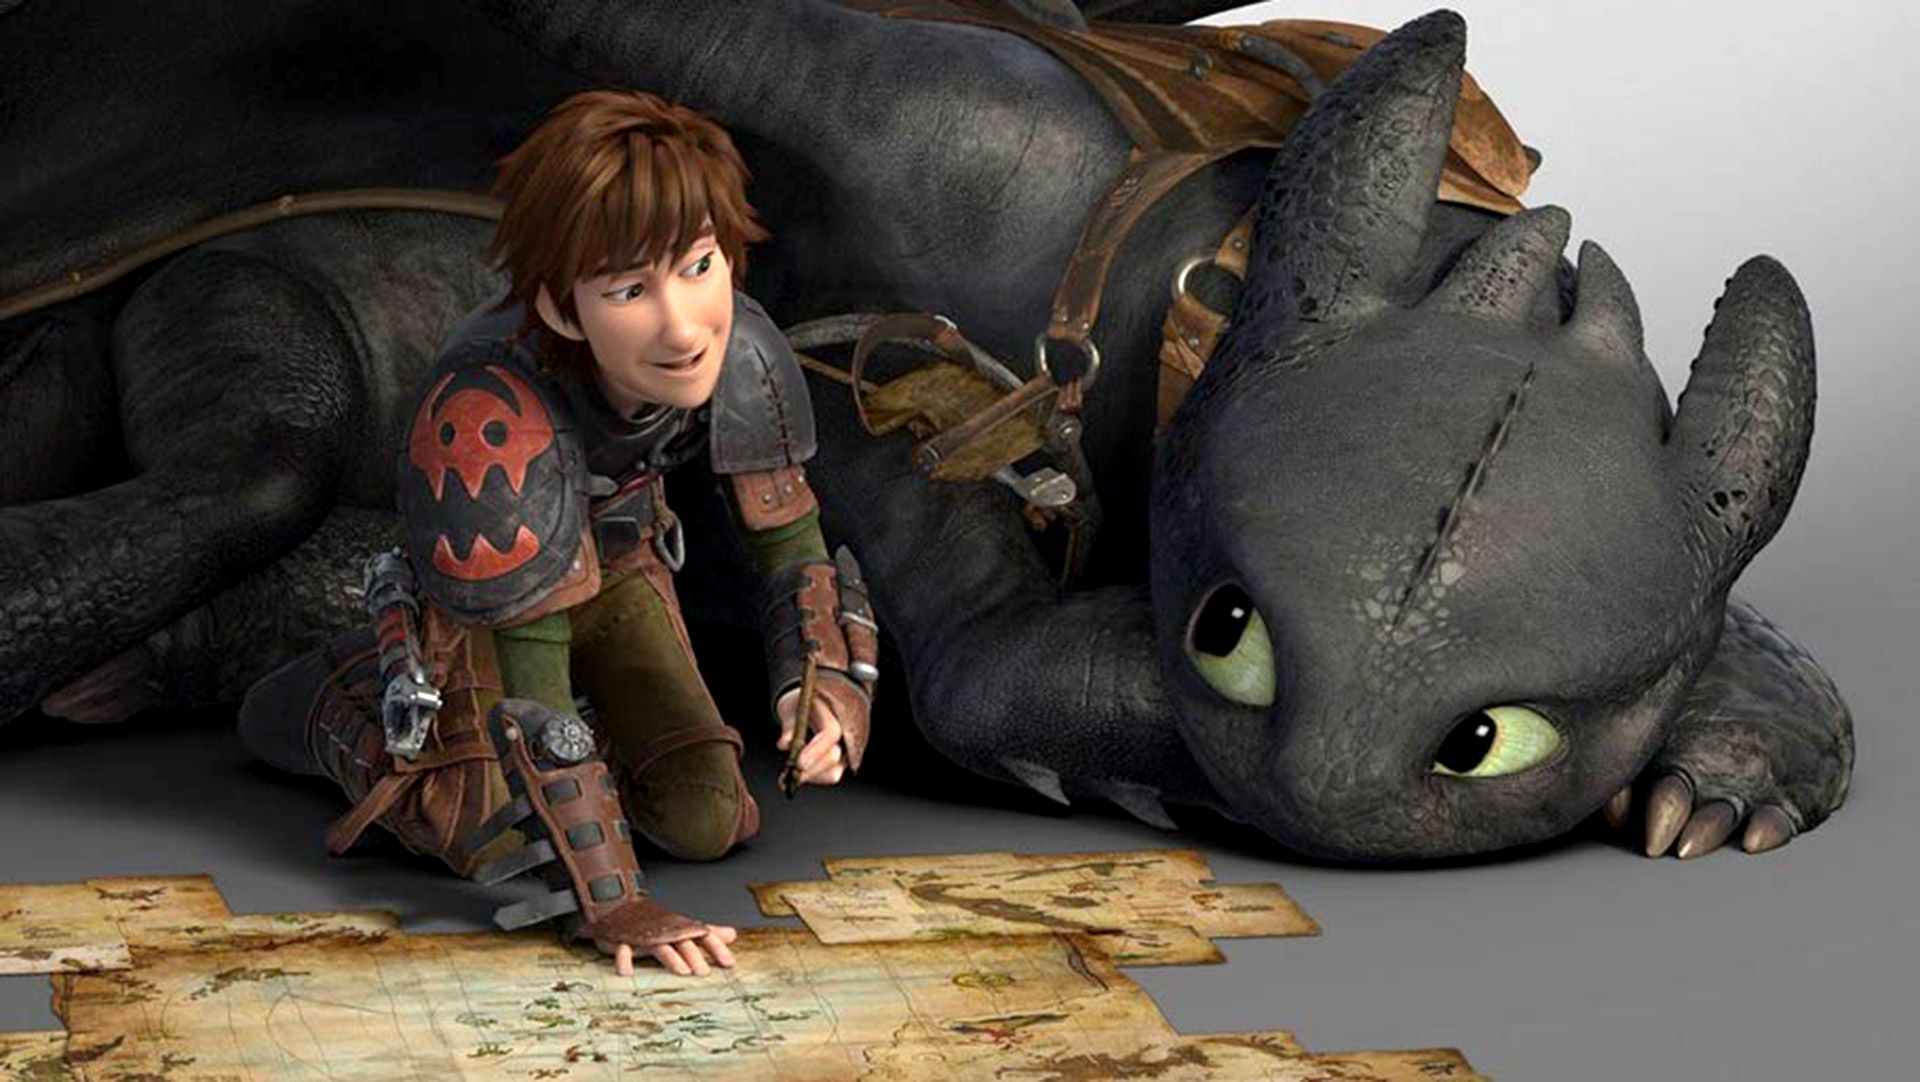 How To Train Your Dragon 2 Toothless Glowing - wallpaper.